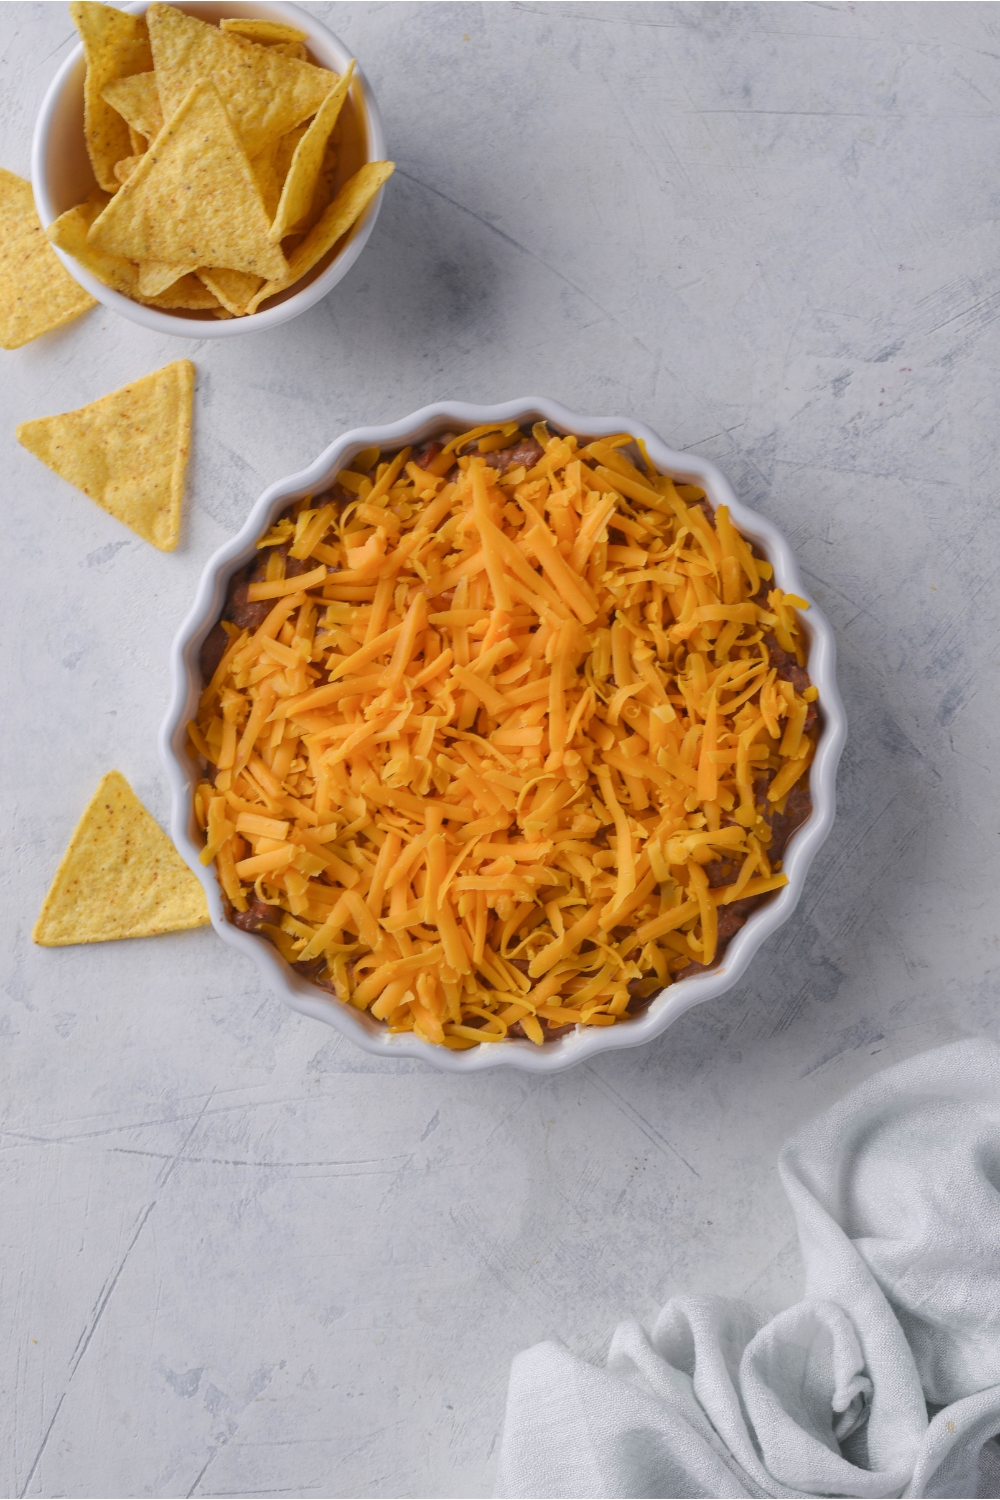 White serving dish with skyline chili dip and a layer of unmelted shredded cheese on top. Next to the chili dip is a smaller bowl of tortilla chips with some chips spilling over.